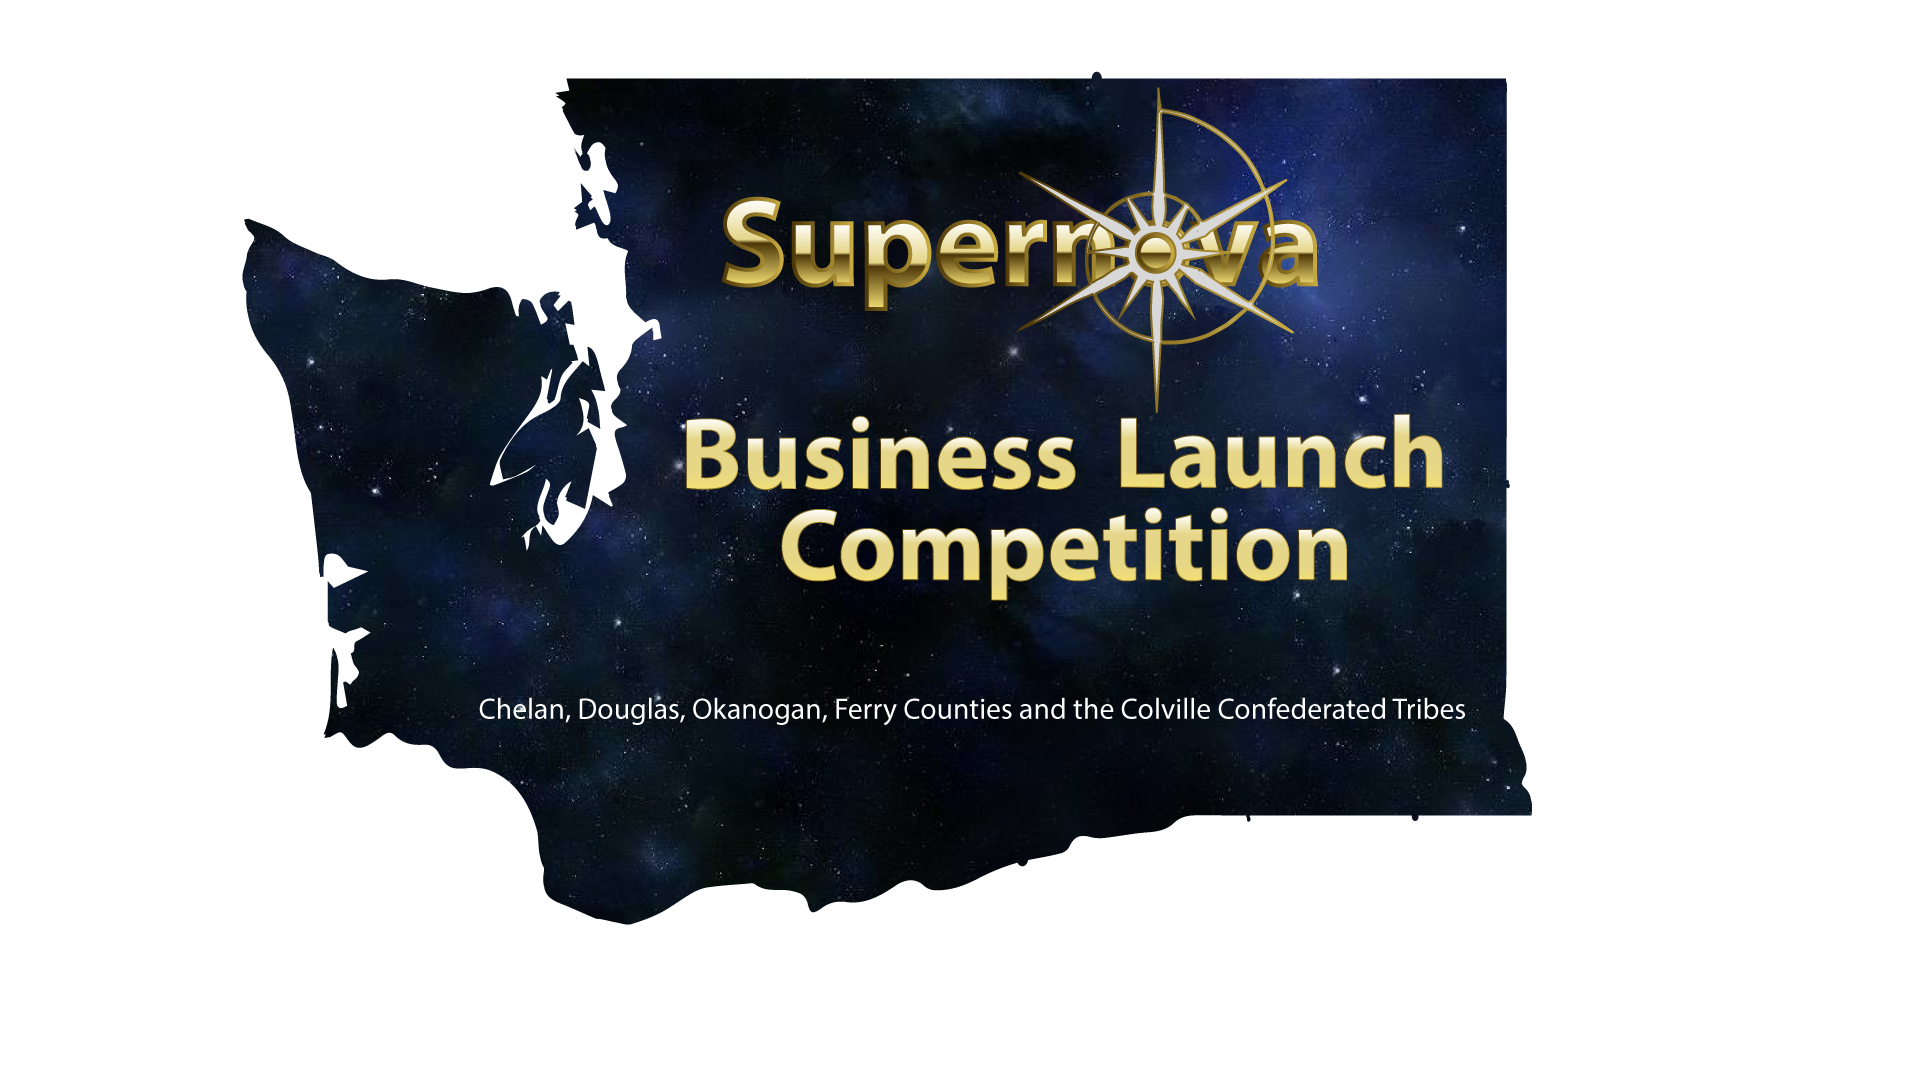 Third Annual Supernova Business Launch Competition